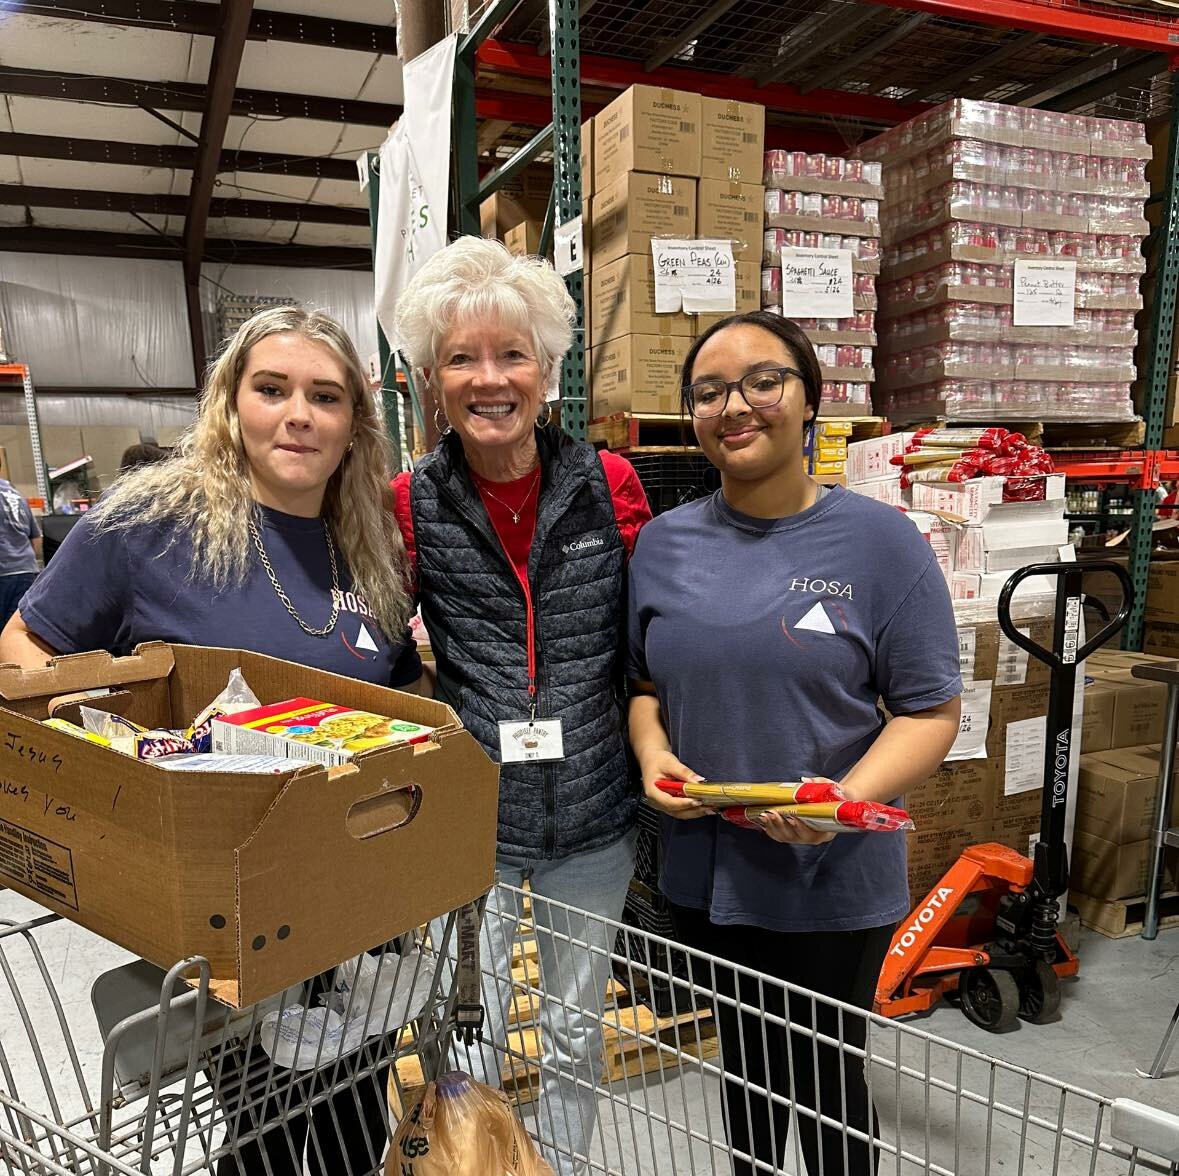 Over 30 Baldwin County High School students volunteered at Prodisee Pantry in Spanish Fort on Nov. 11.